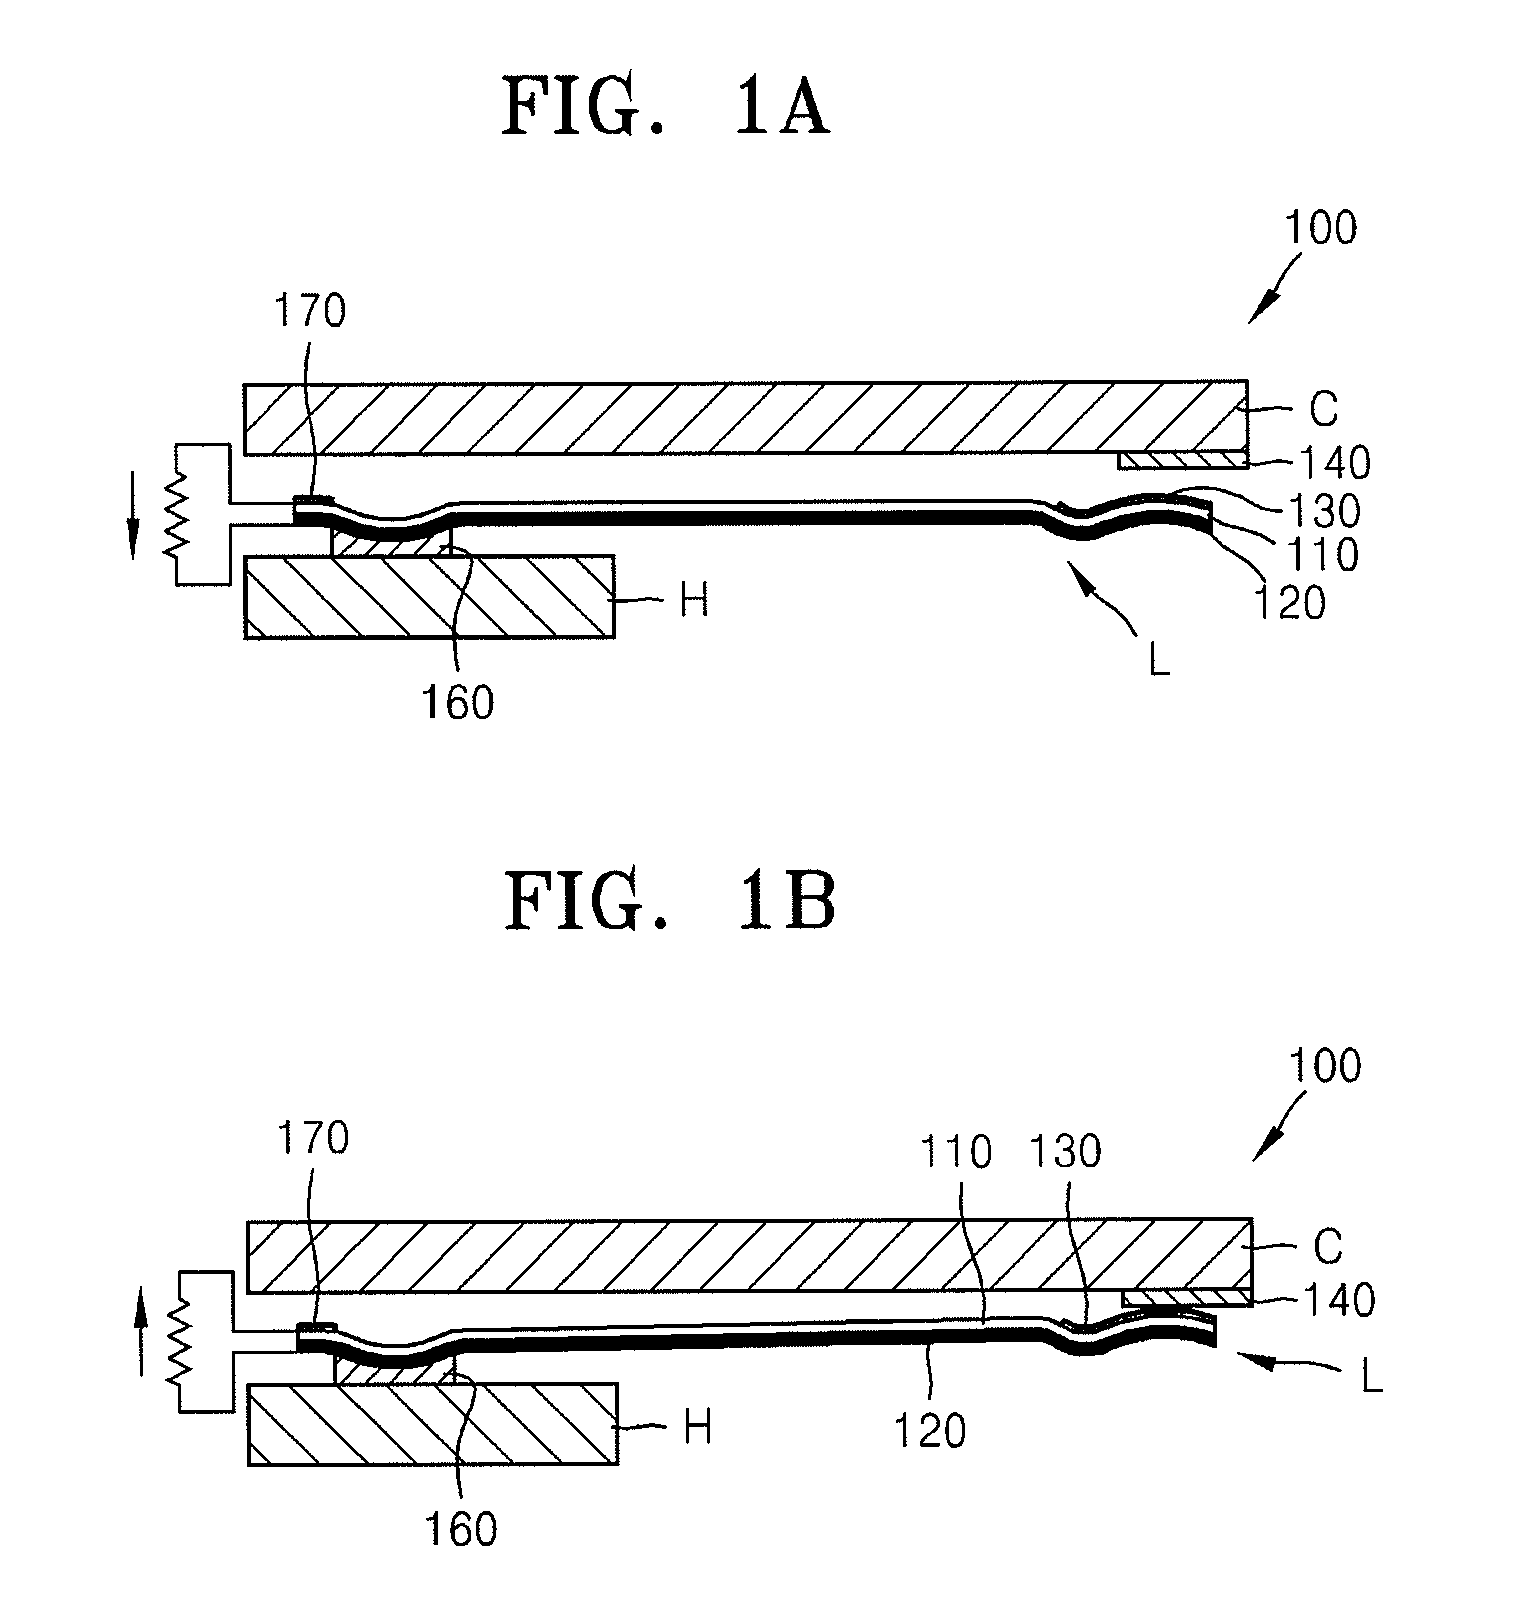 Energy harvesting device using pyroelectric material